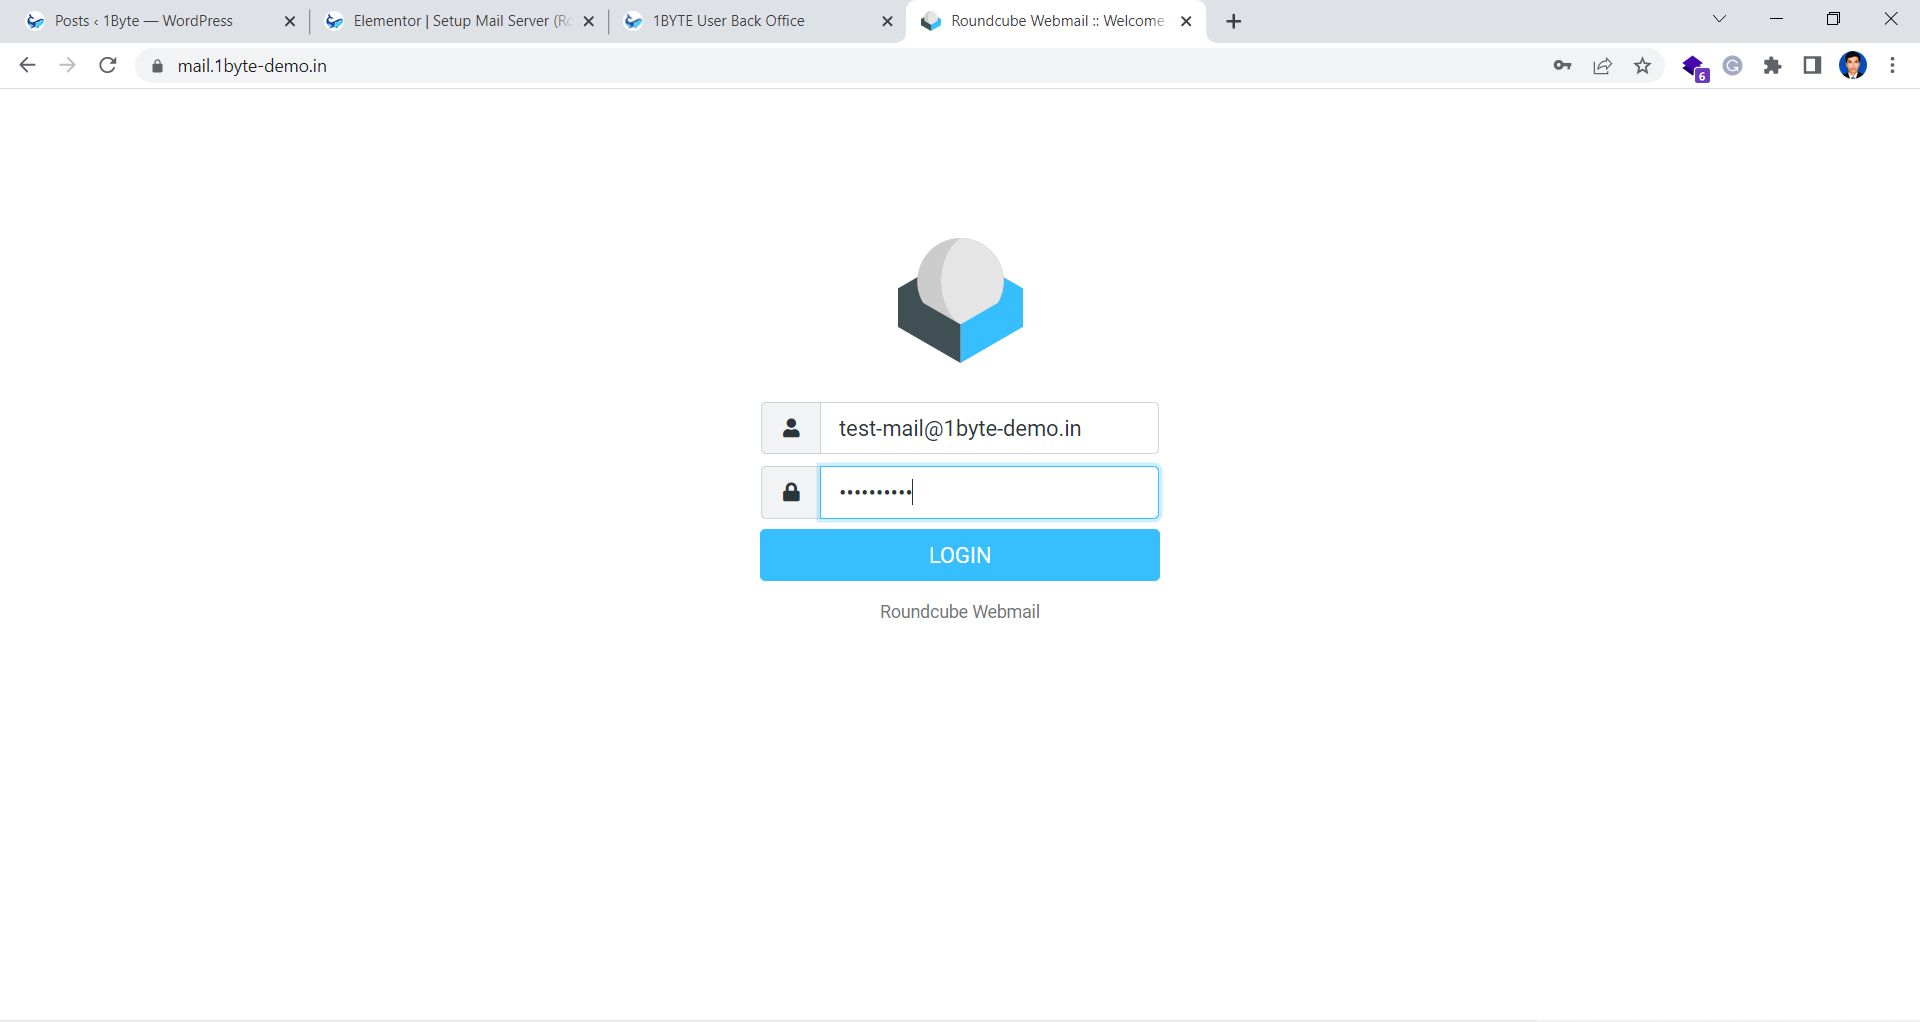 SETUP MAIL SERVER (ROUNDCUBE WEBMAIL) ON AAPANEL + CLOUDHOSTING